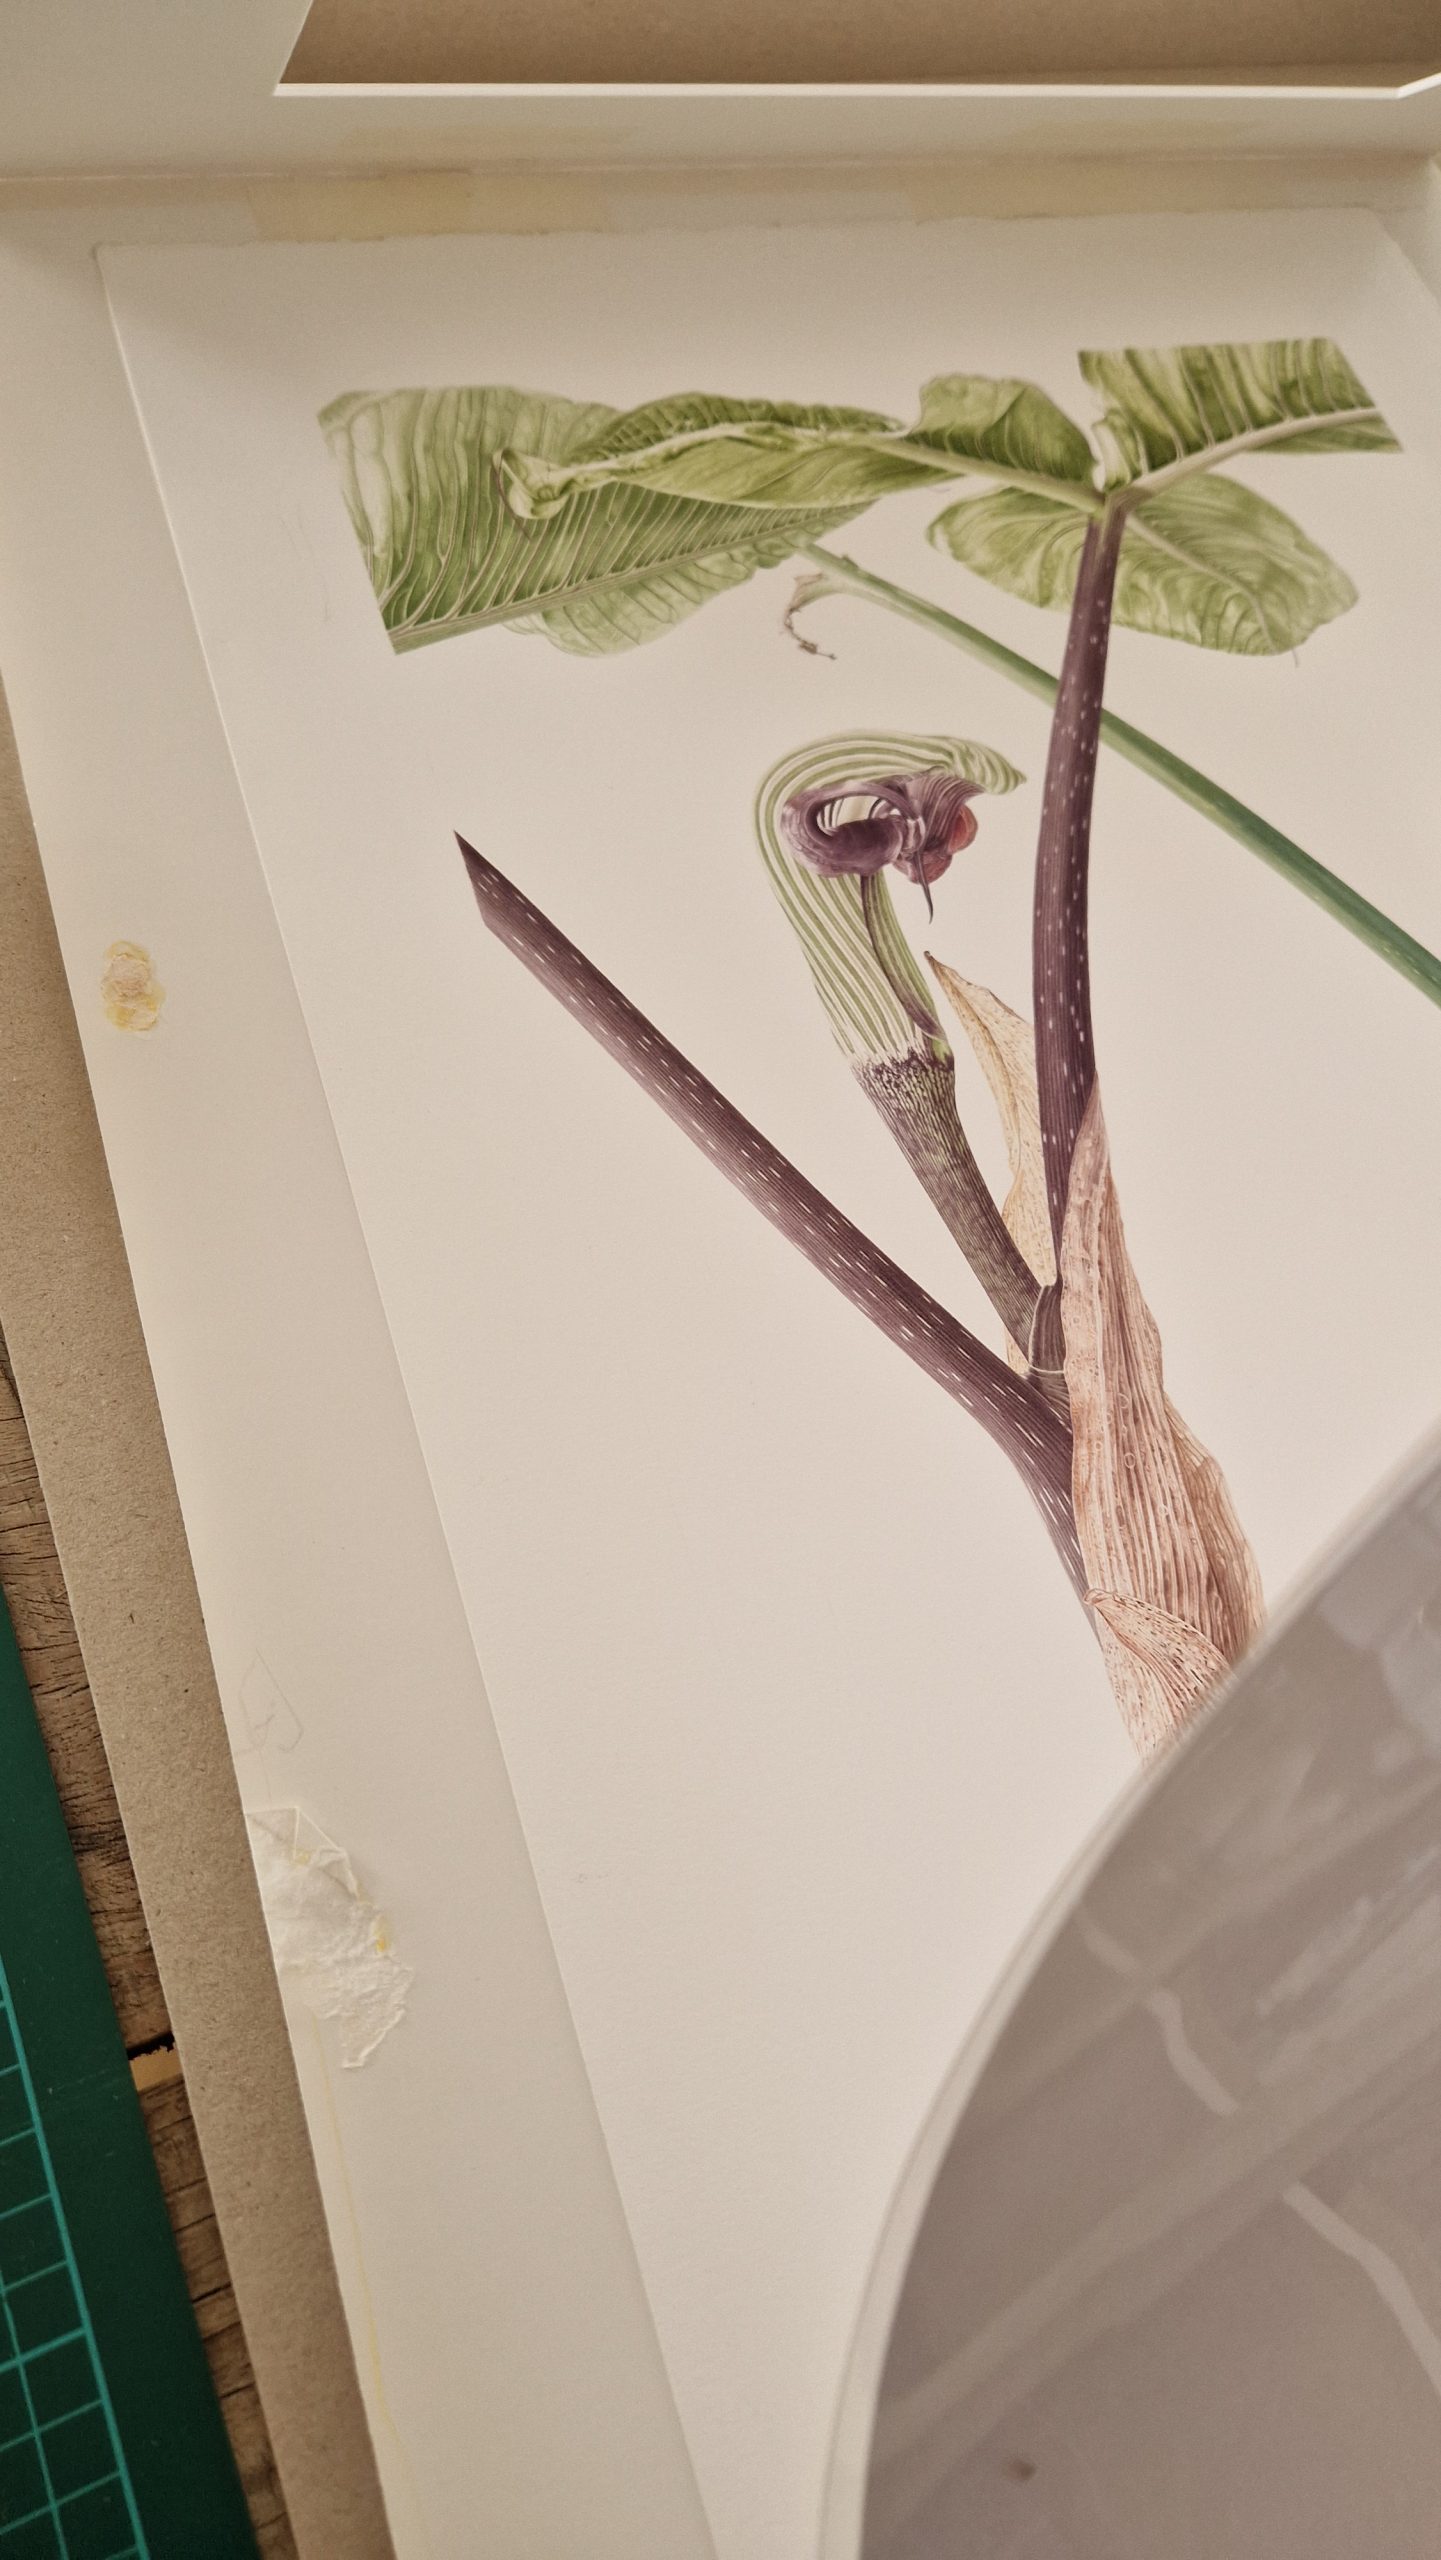 Arisaema ringens - watercolor painting by Marianne Hazlewood removed from its frame, with protective layers of acid free cartridge paper and an acetate sheet